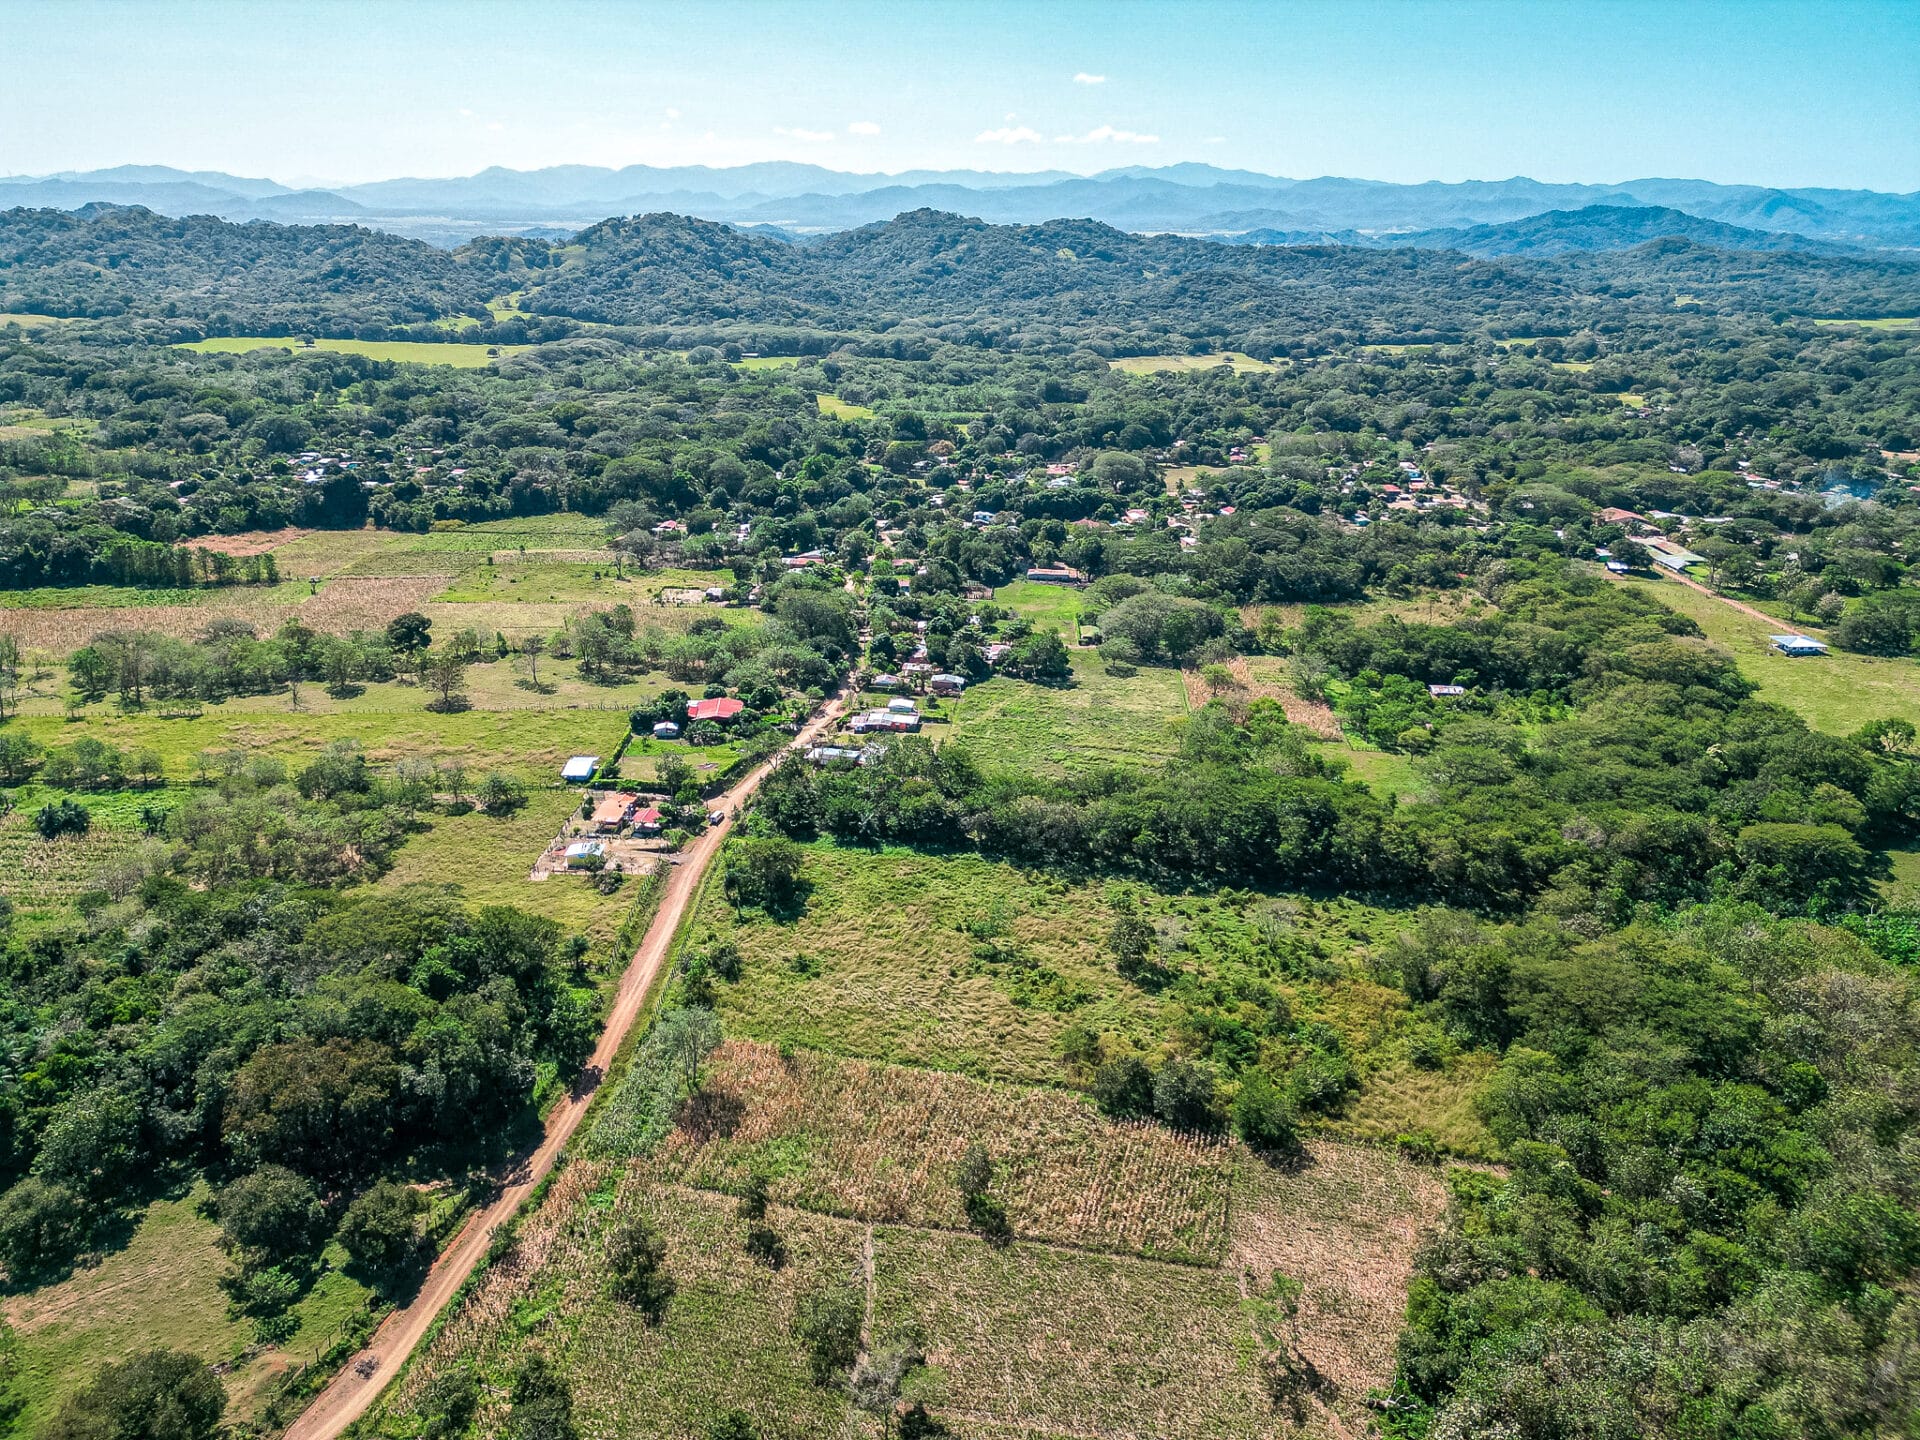 El Eden Countryside Retreat – 3 Hectares (7.41 Acres) of Fertile Bliss, Just $5 per sqm!